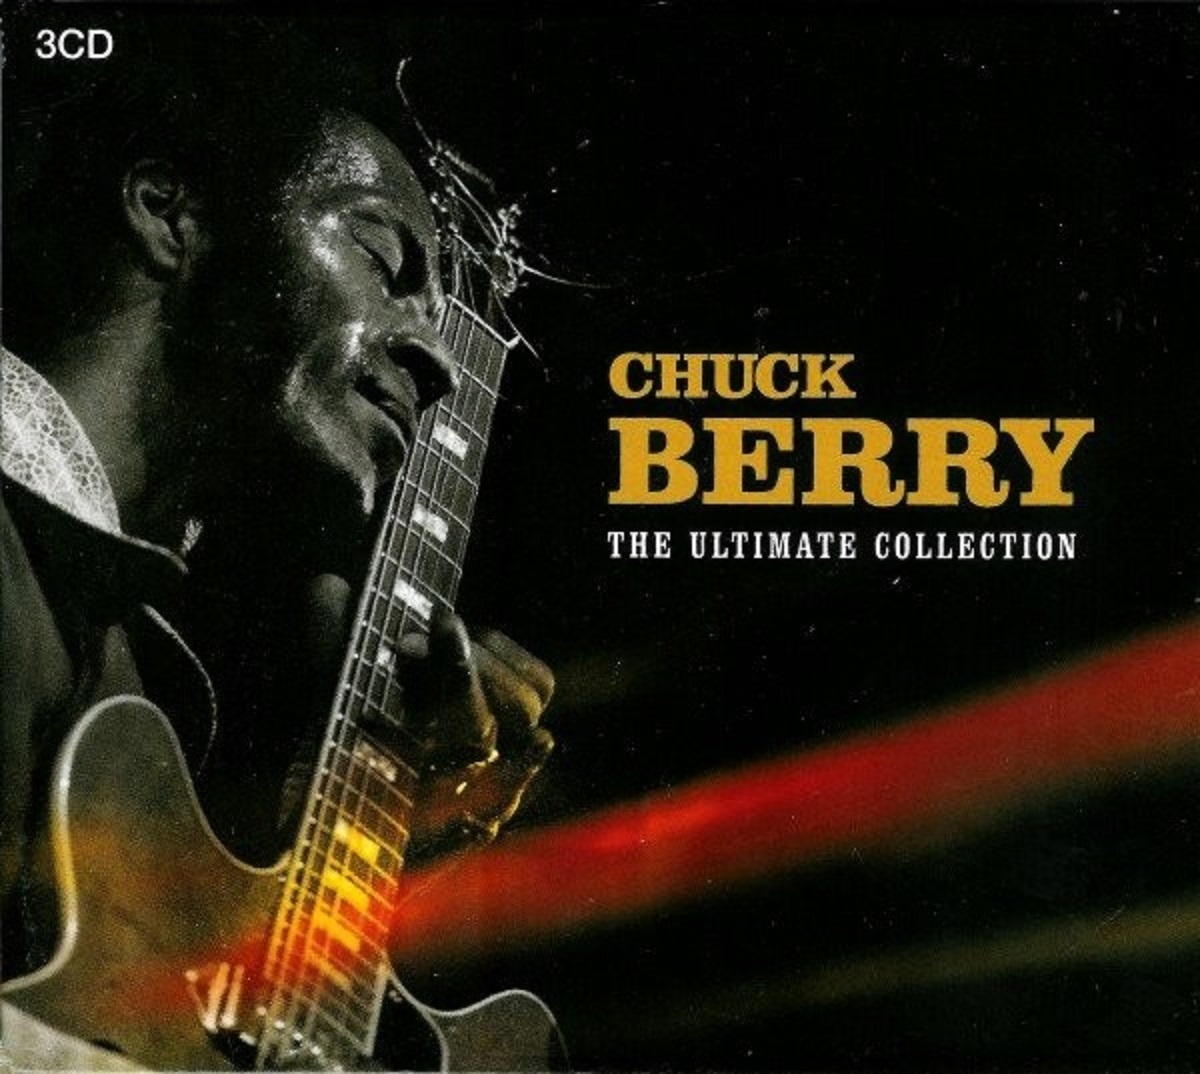 Chuck Berry - The Ultimate Collection (3CD)